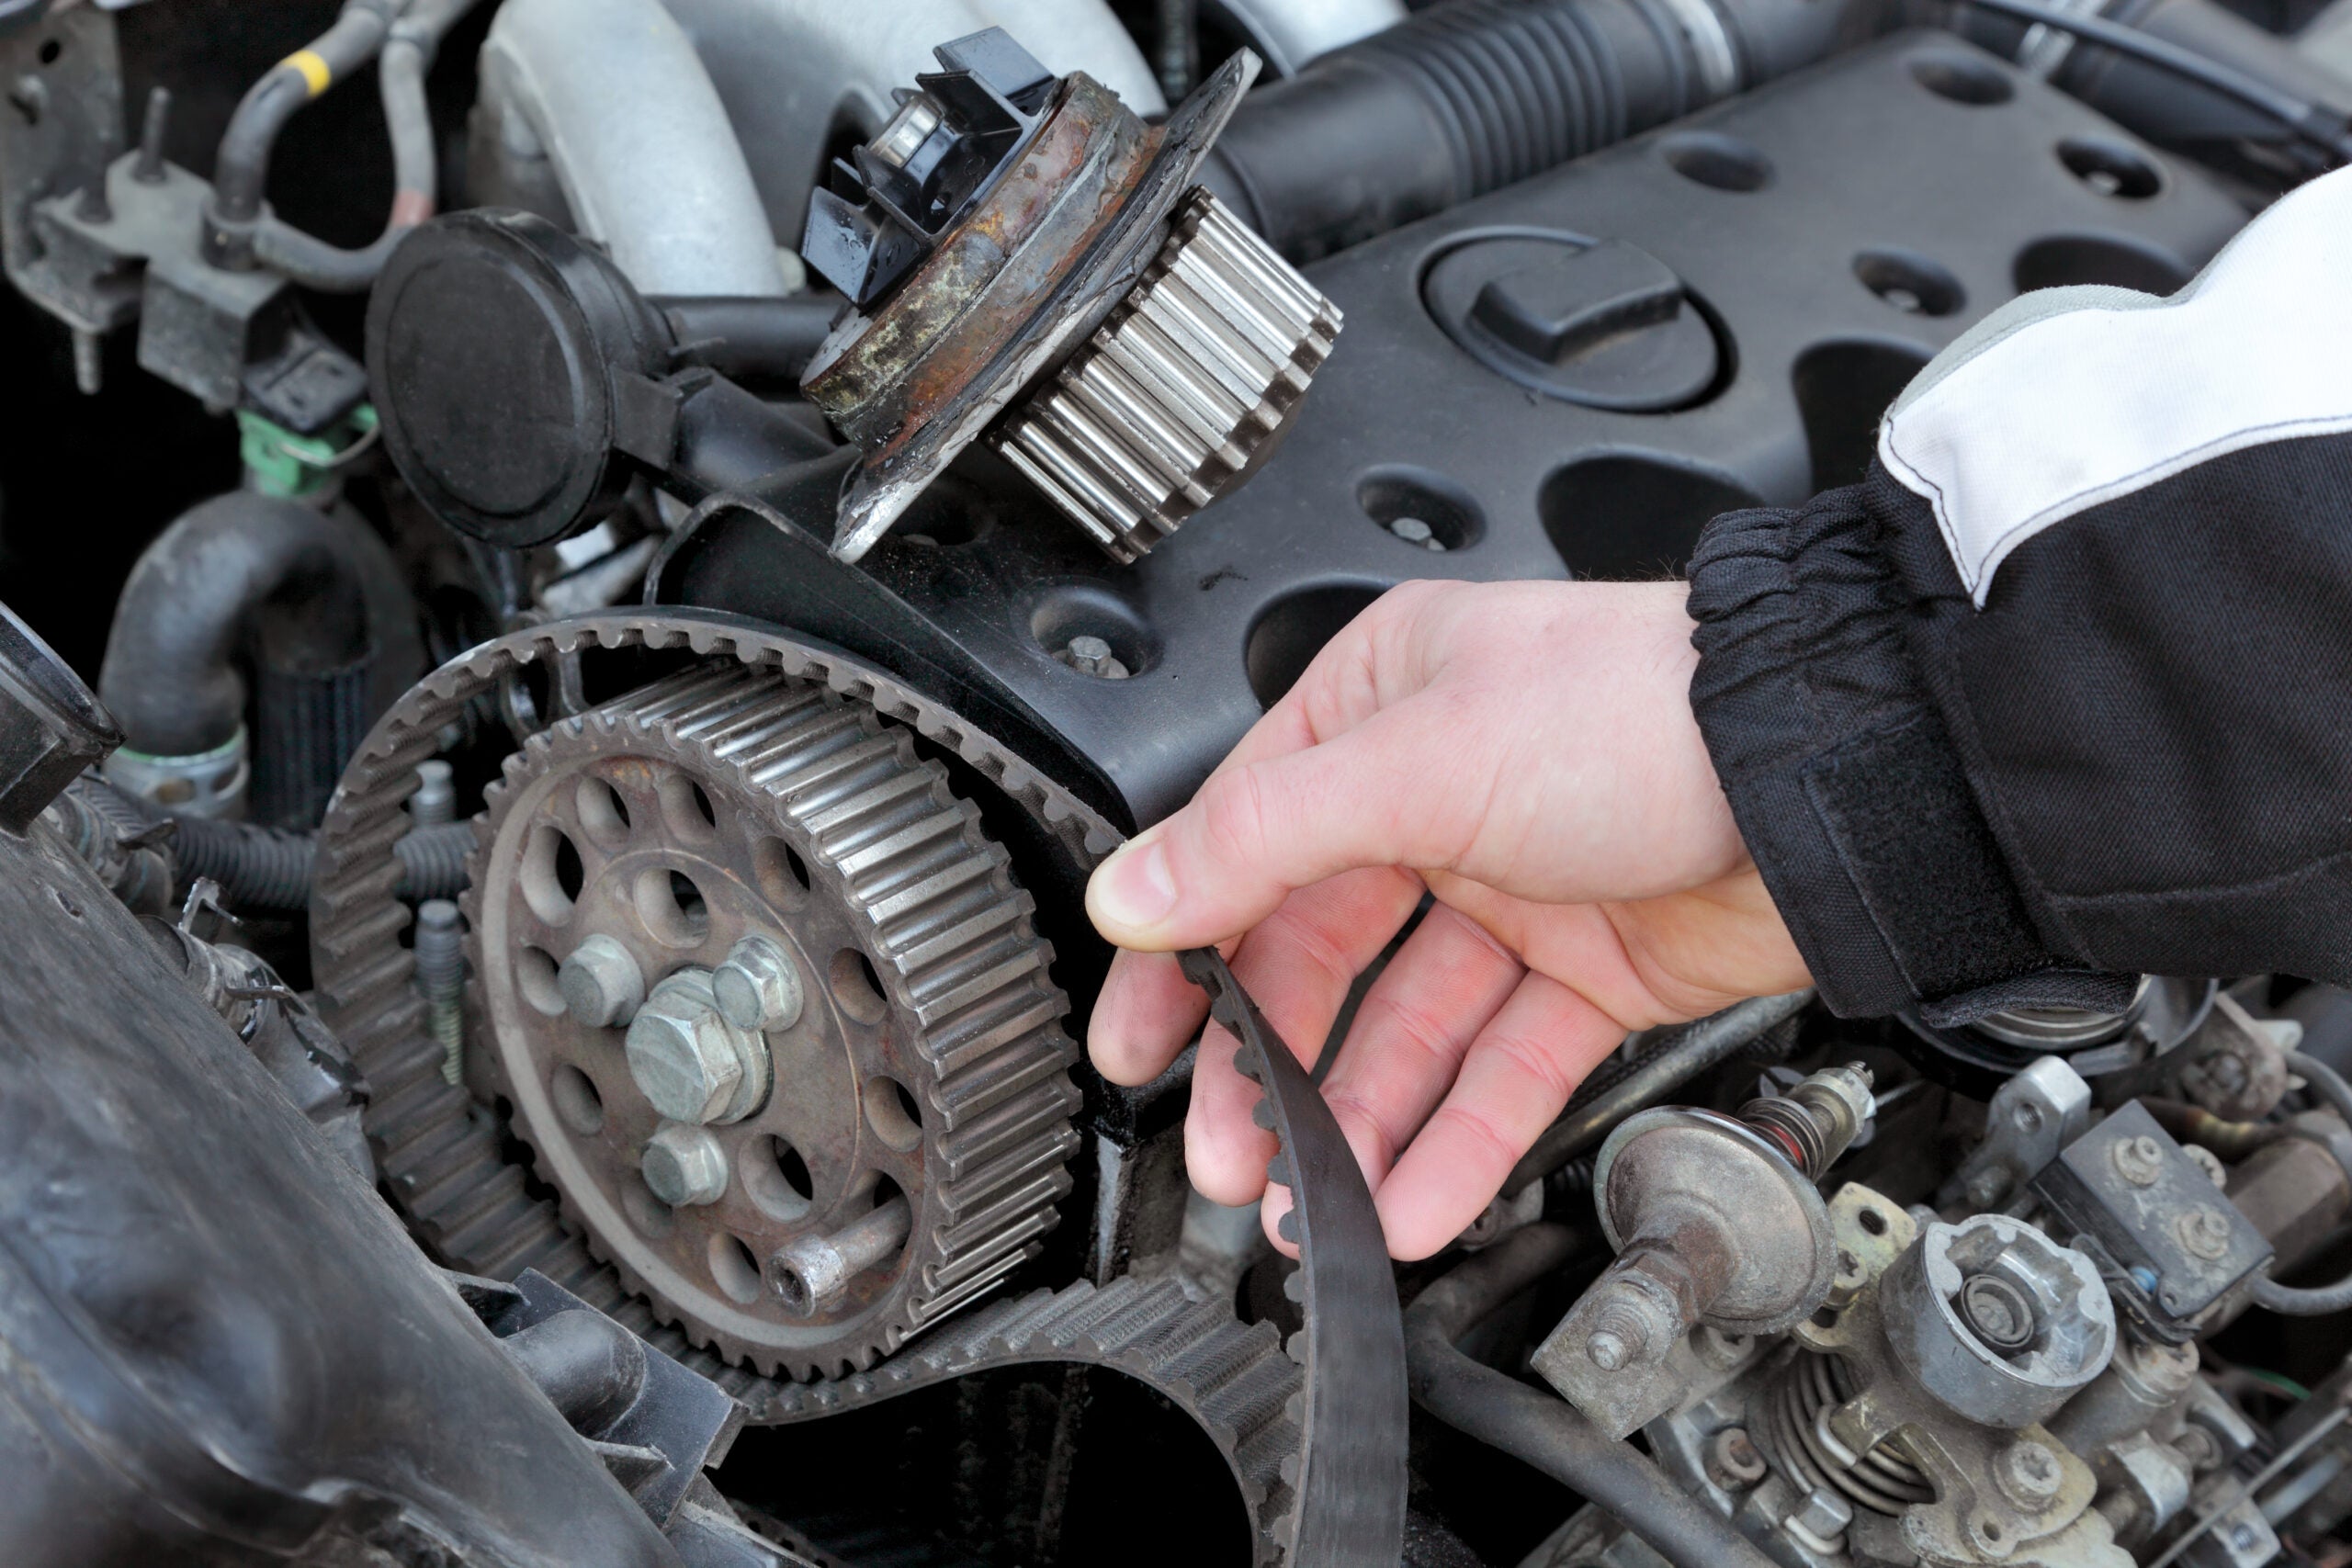 How To Replace a Water Pump